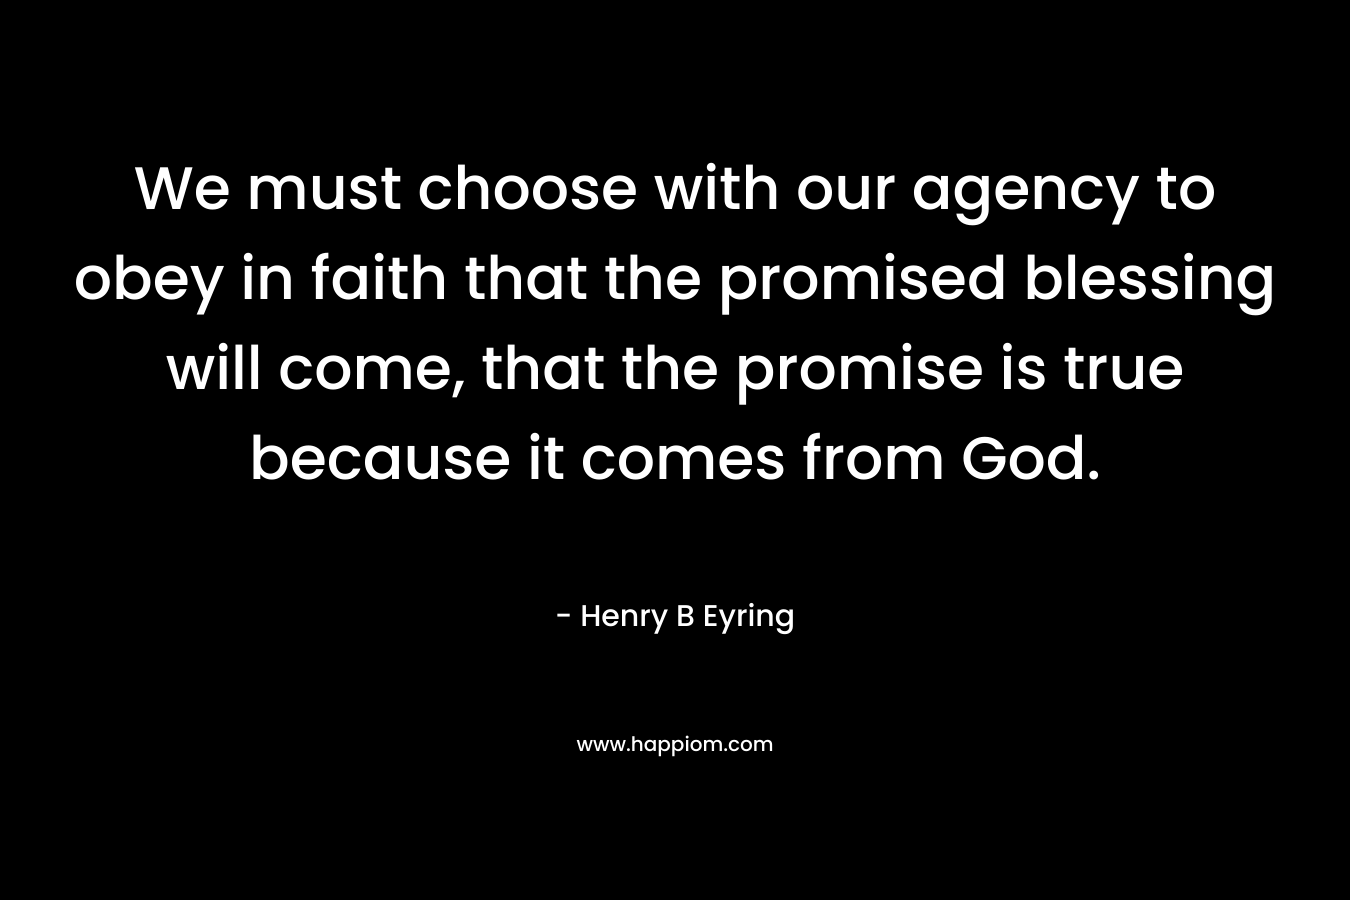 We must choose with our agency to obey in faith that the promised blessing will come, that the promise is true because it comes from God.